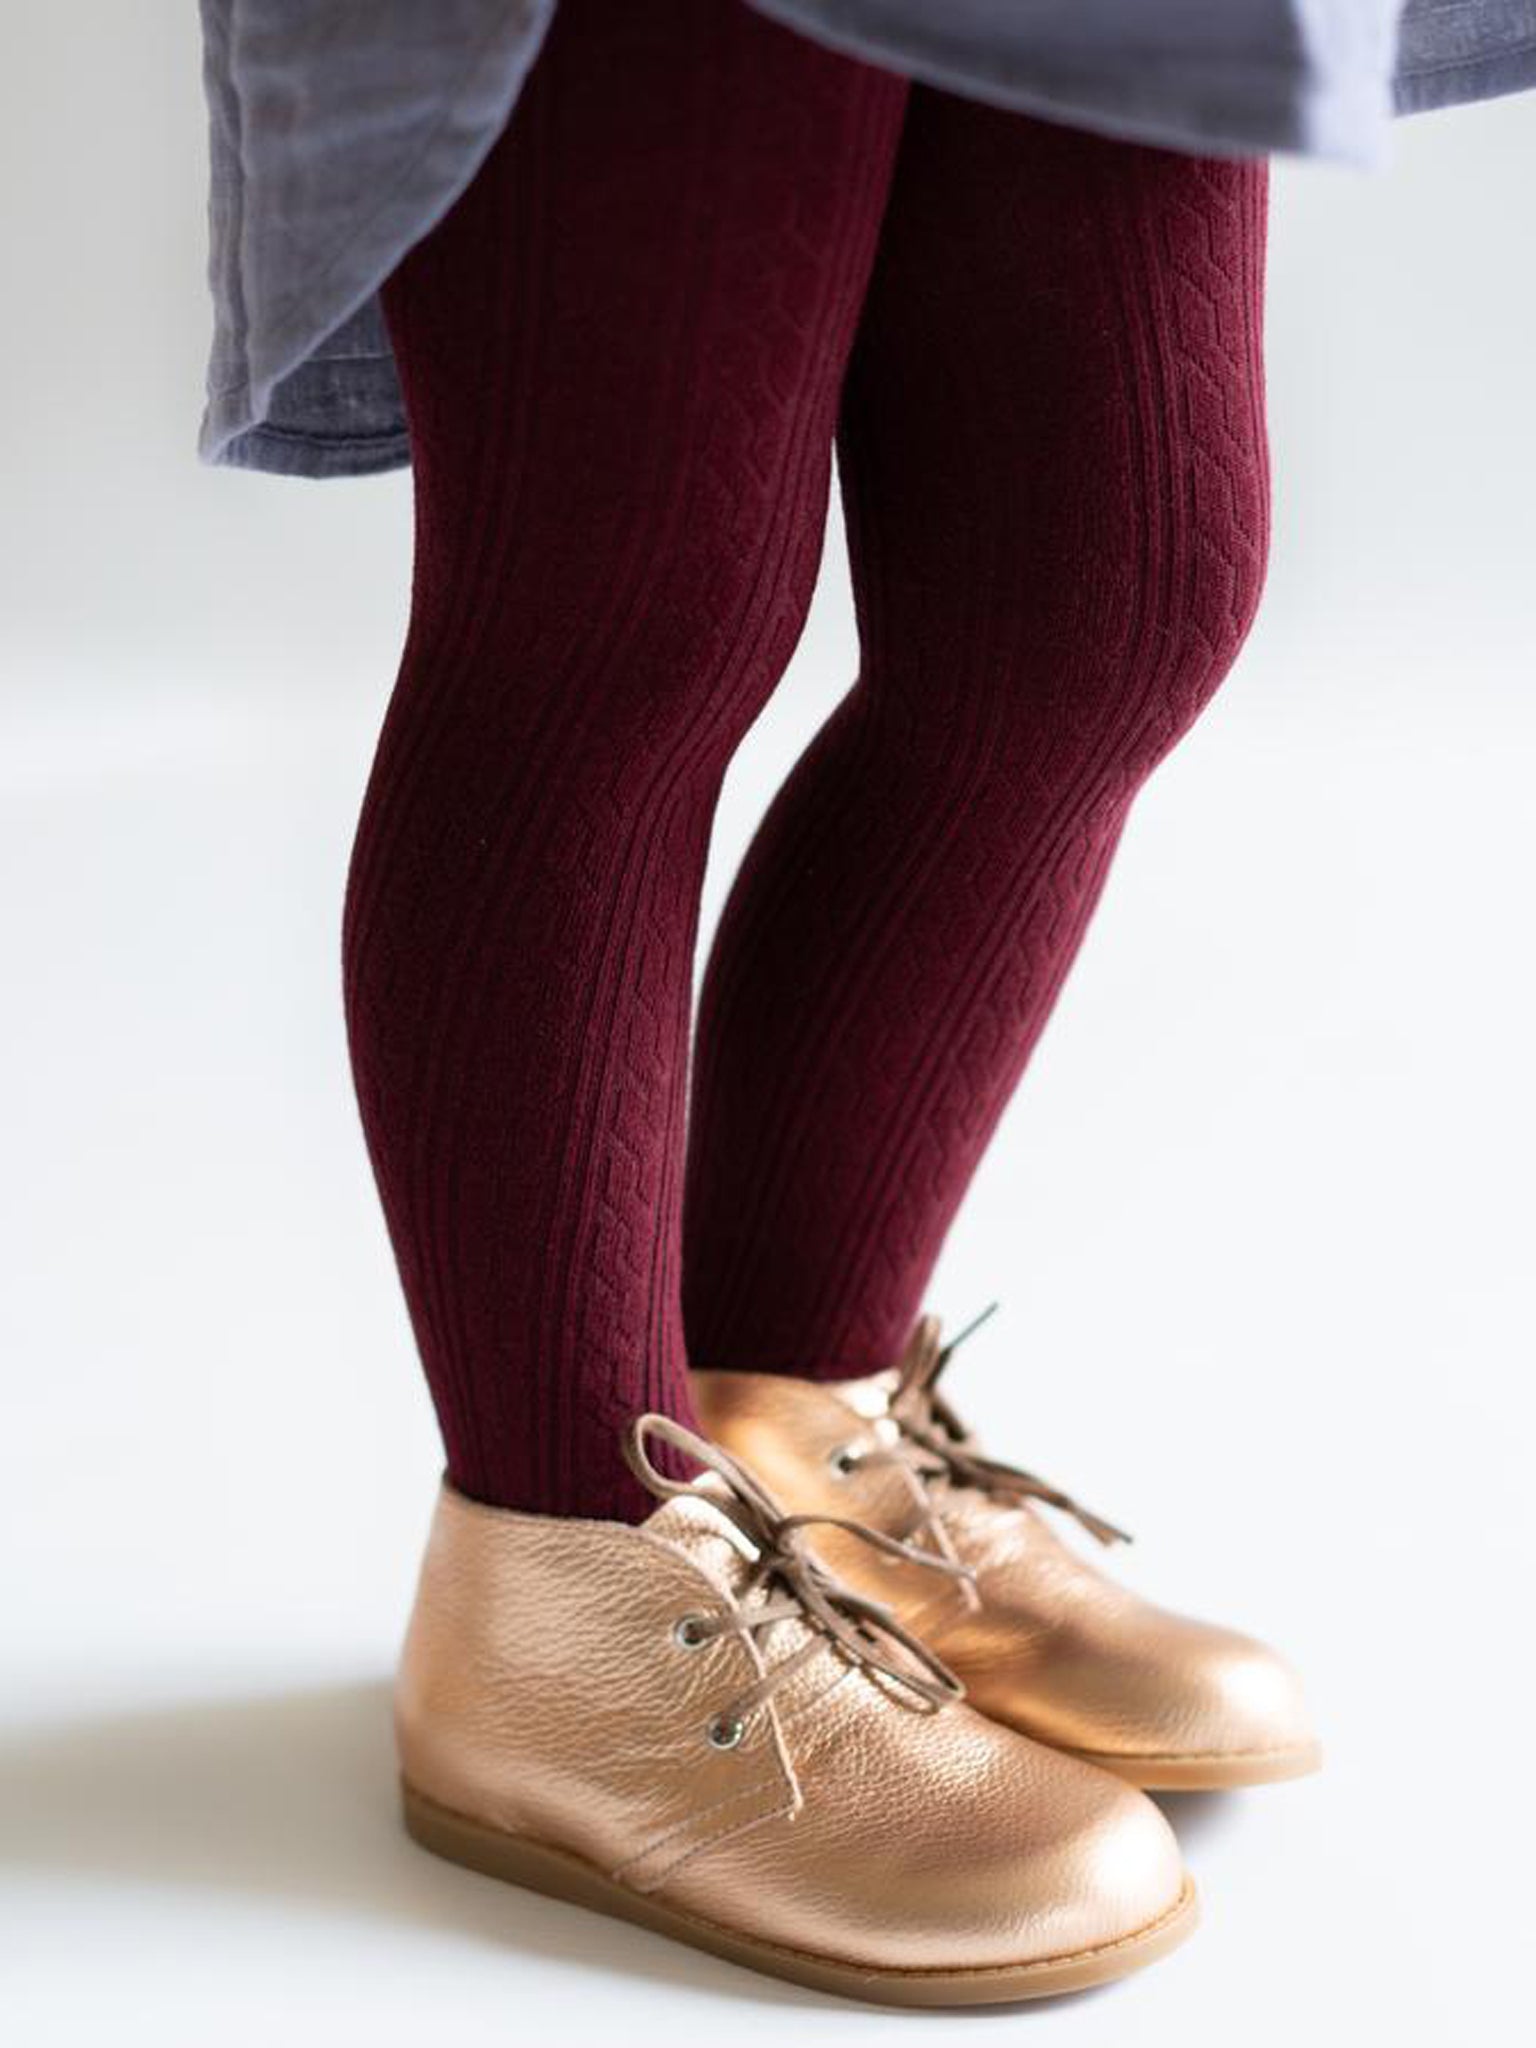 Wine Cable Knit Tights – Little Belles & Beaus